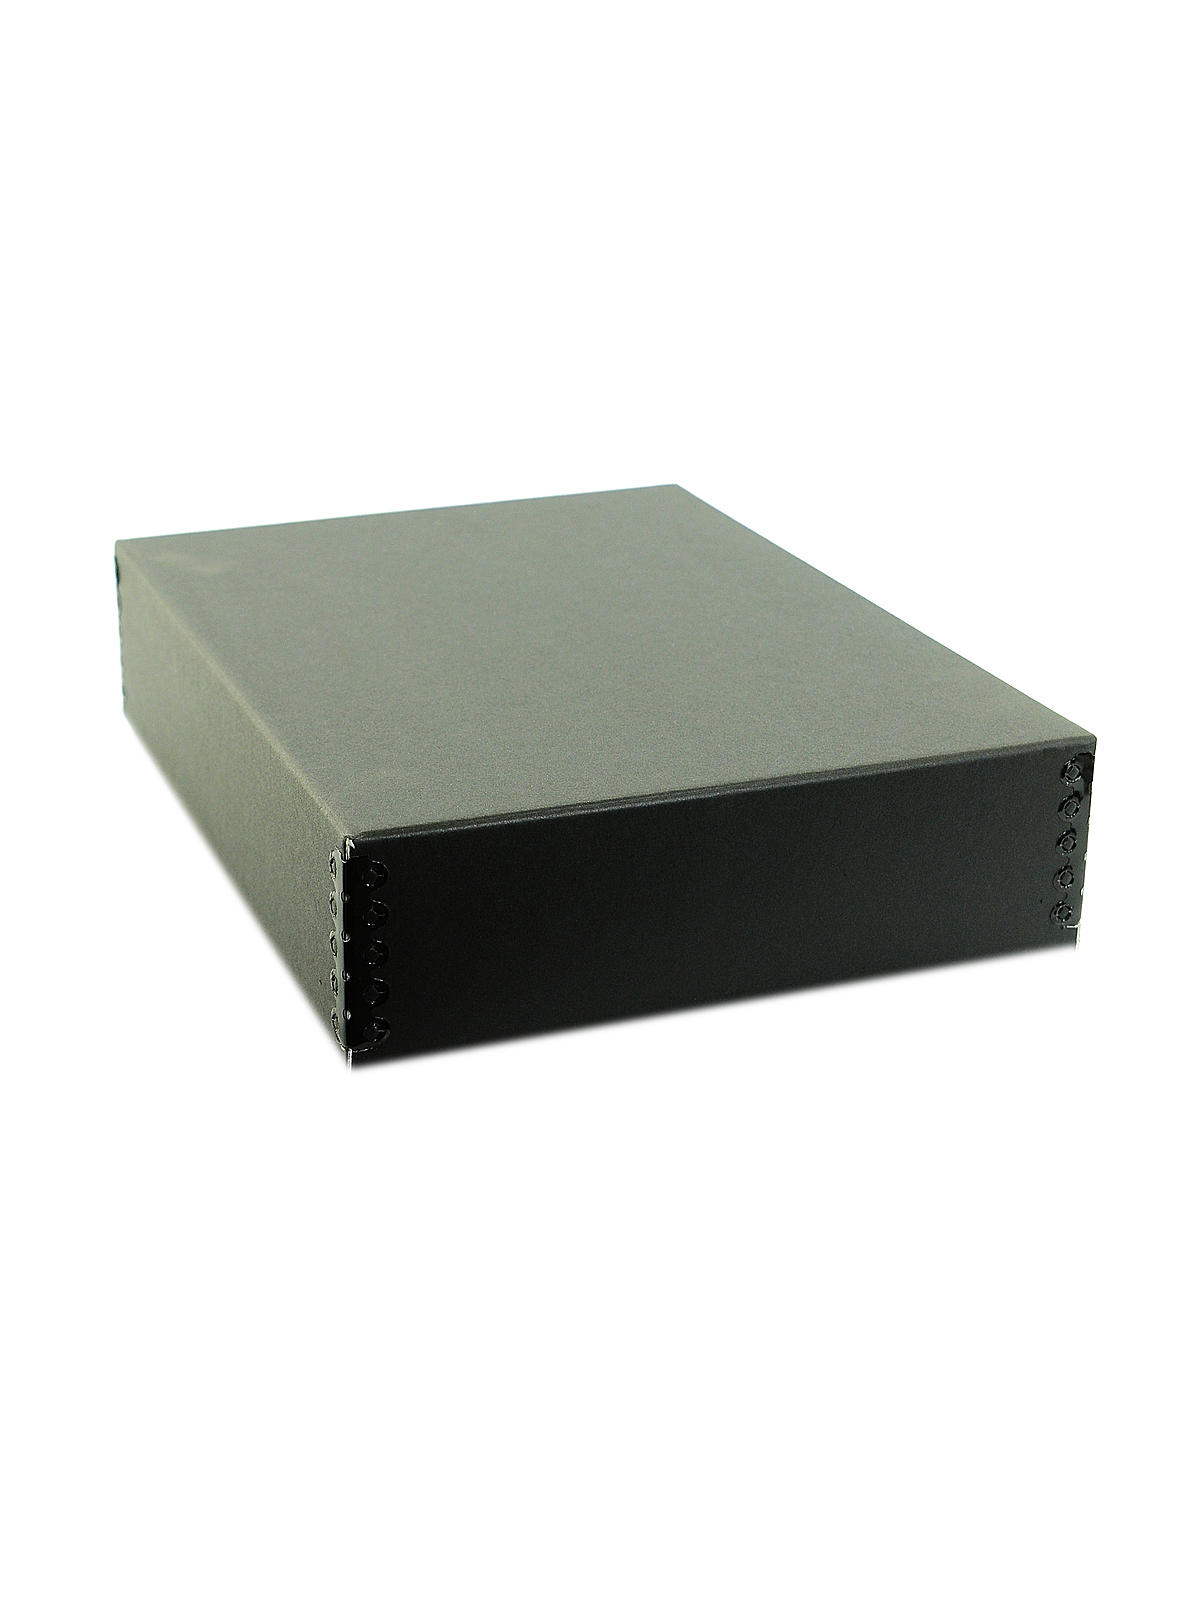 Drop-front Storage Boxes Black 16 In. X 20 In. X 3 In.